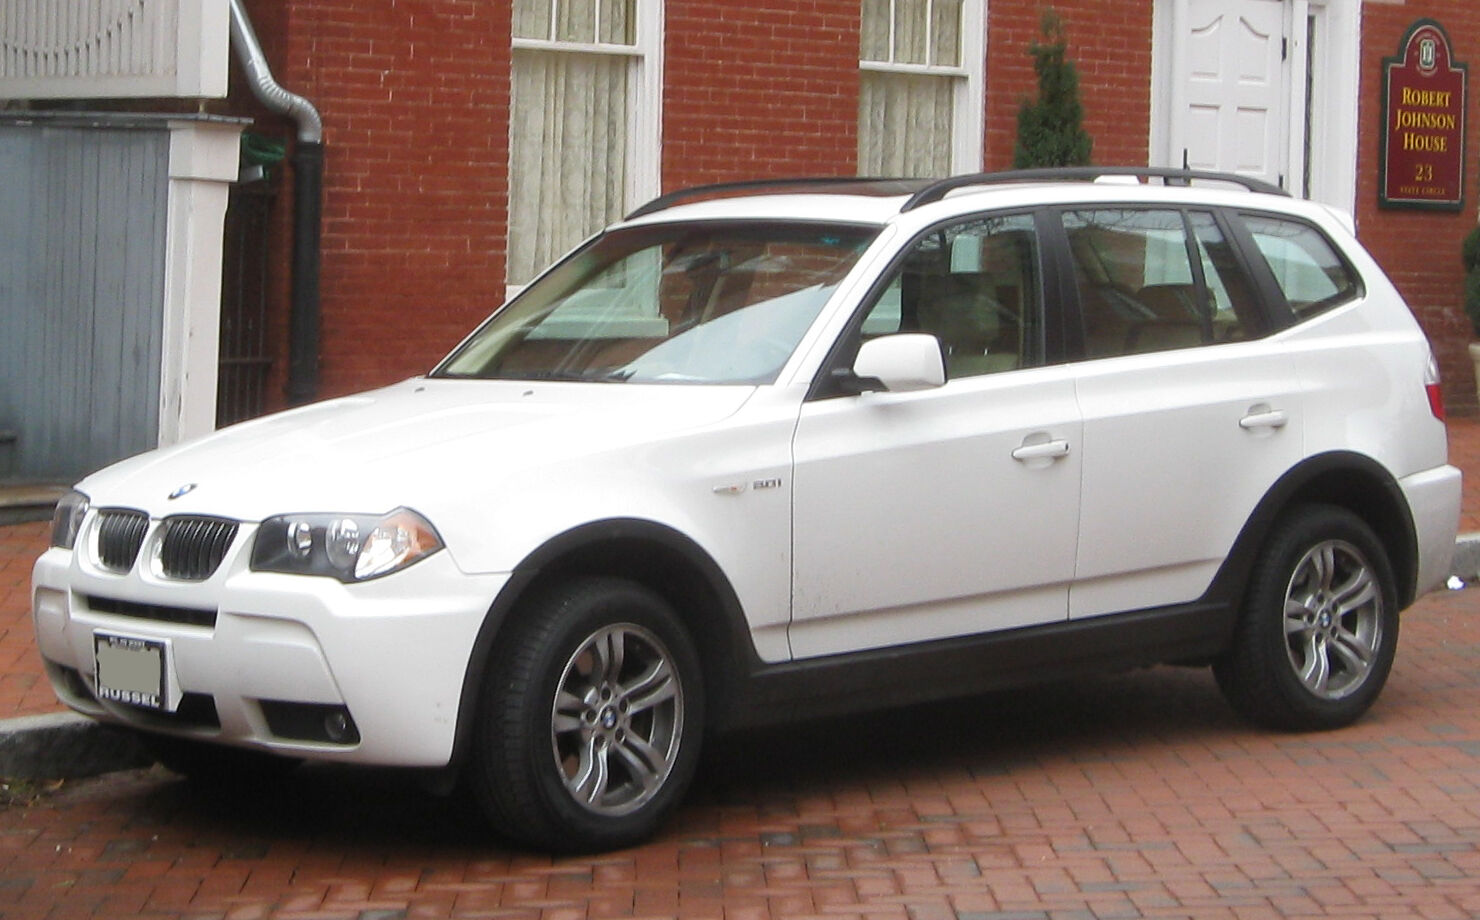 BMW X3 (E83), Tractor & Construction Plant Wiki